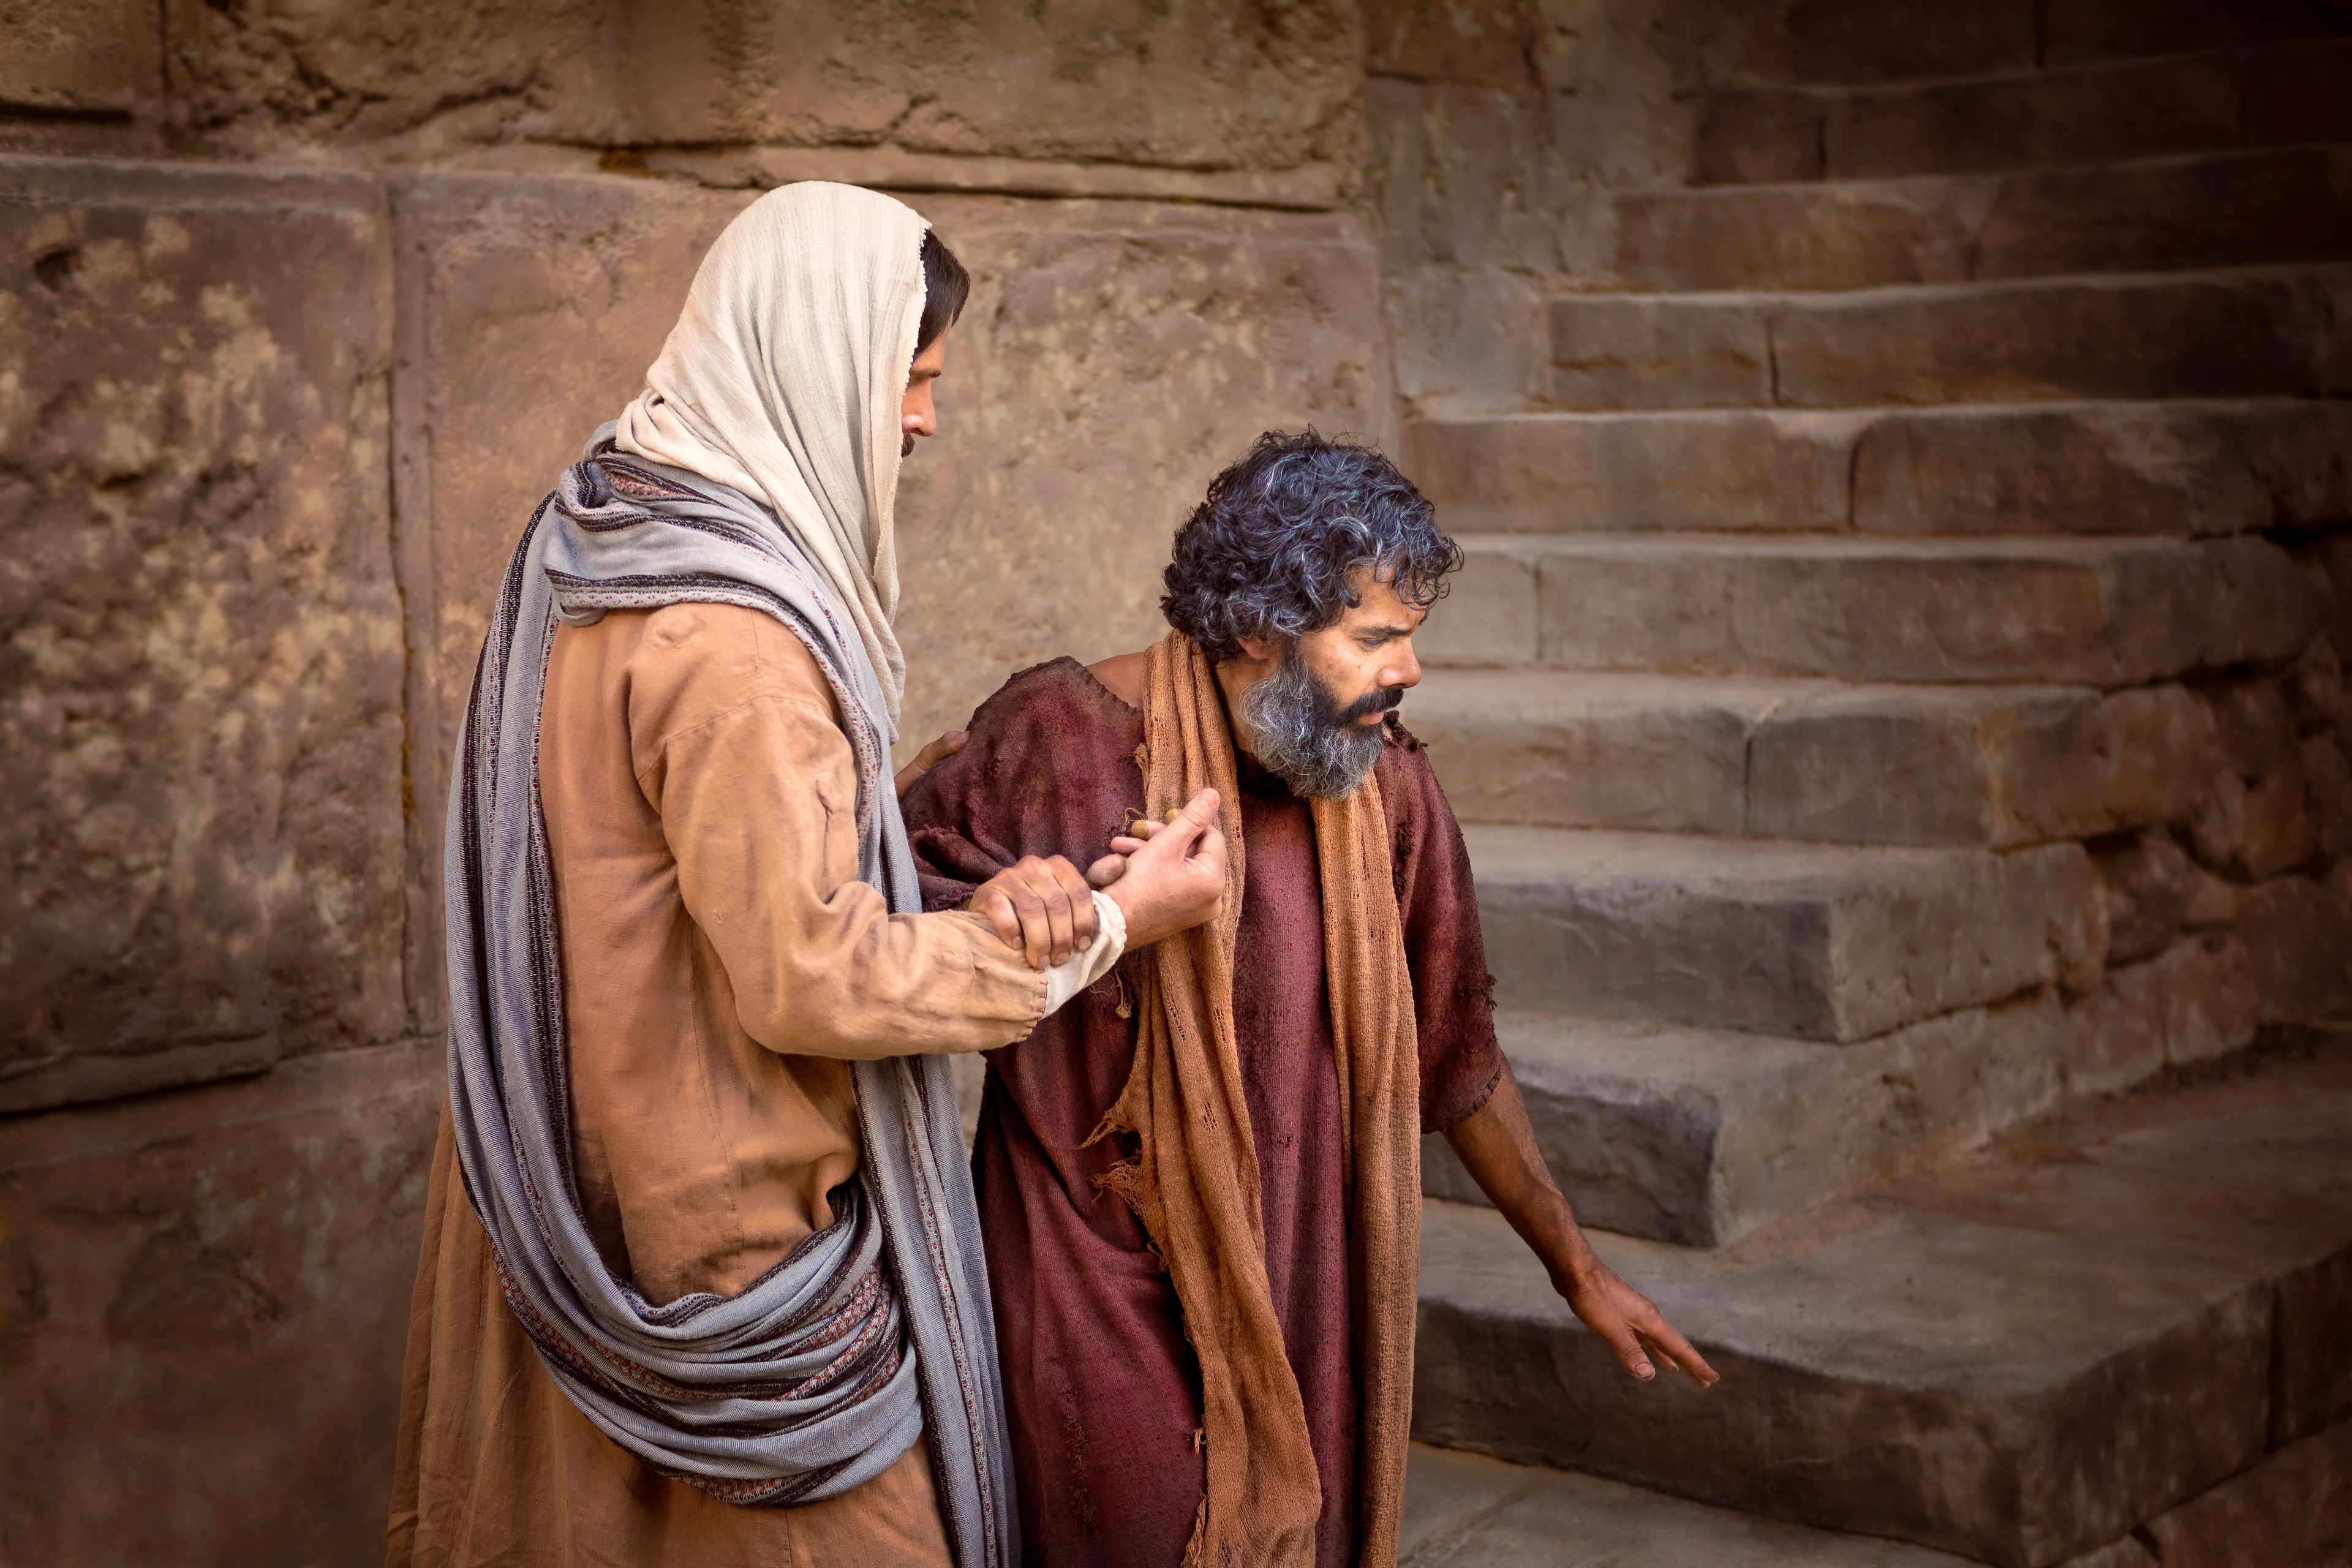 Jesus standing and healing a blind man.